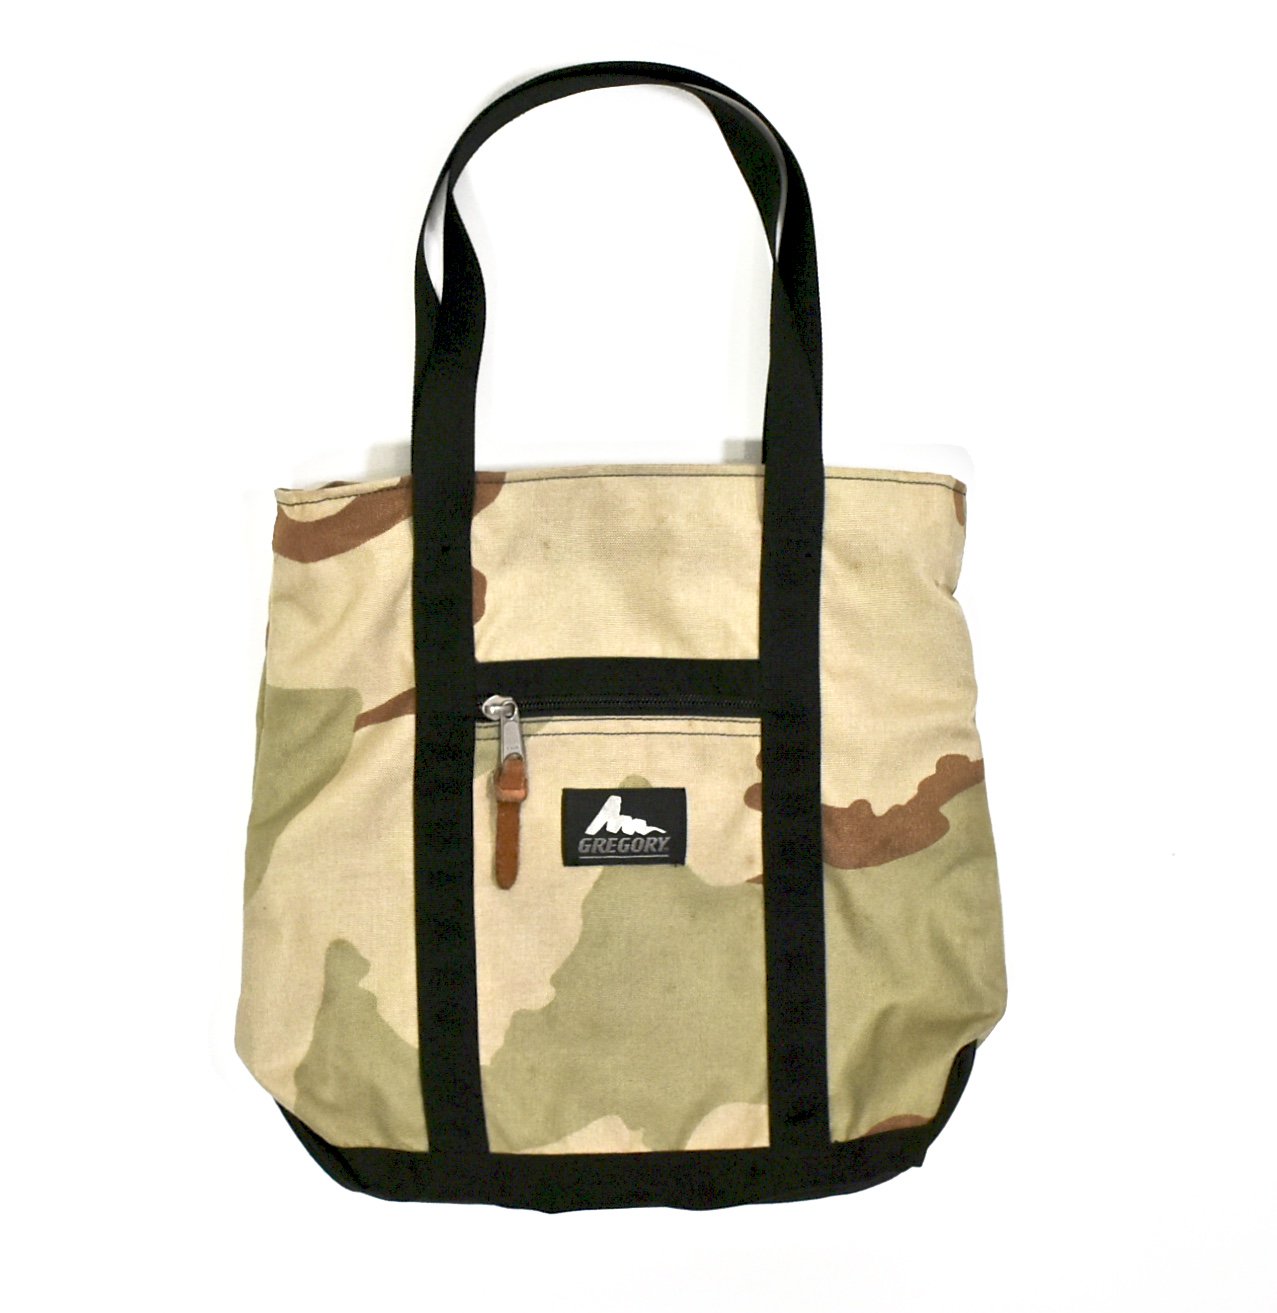 2000s GREGORY Tote bag S MADE IN USA Desert camo